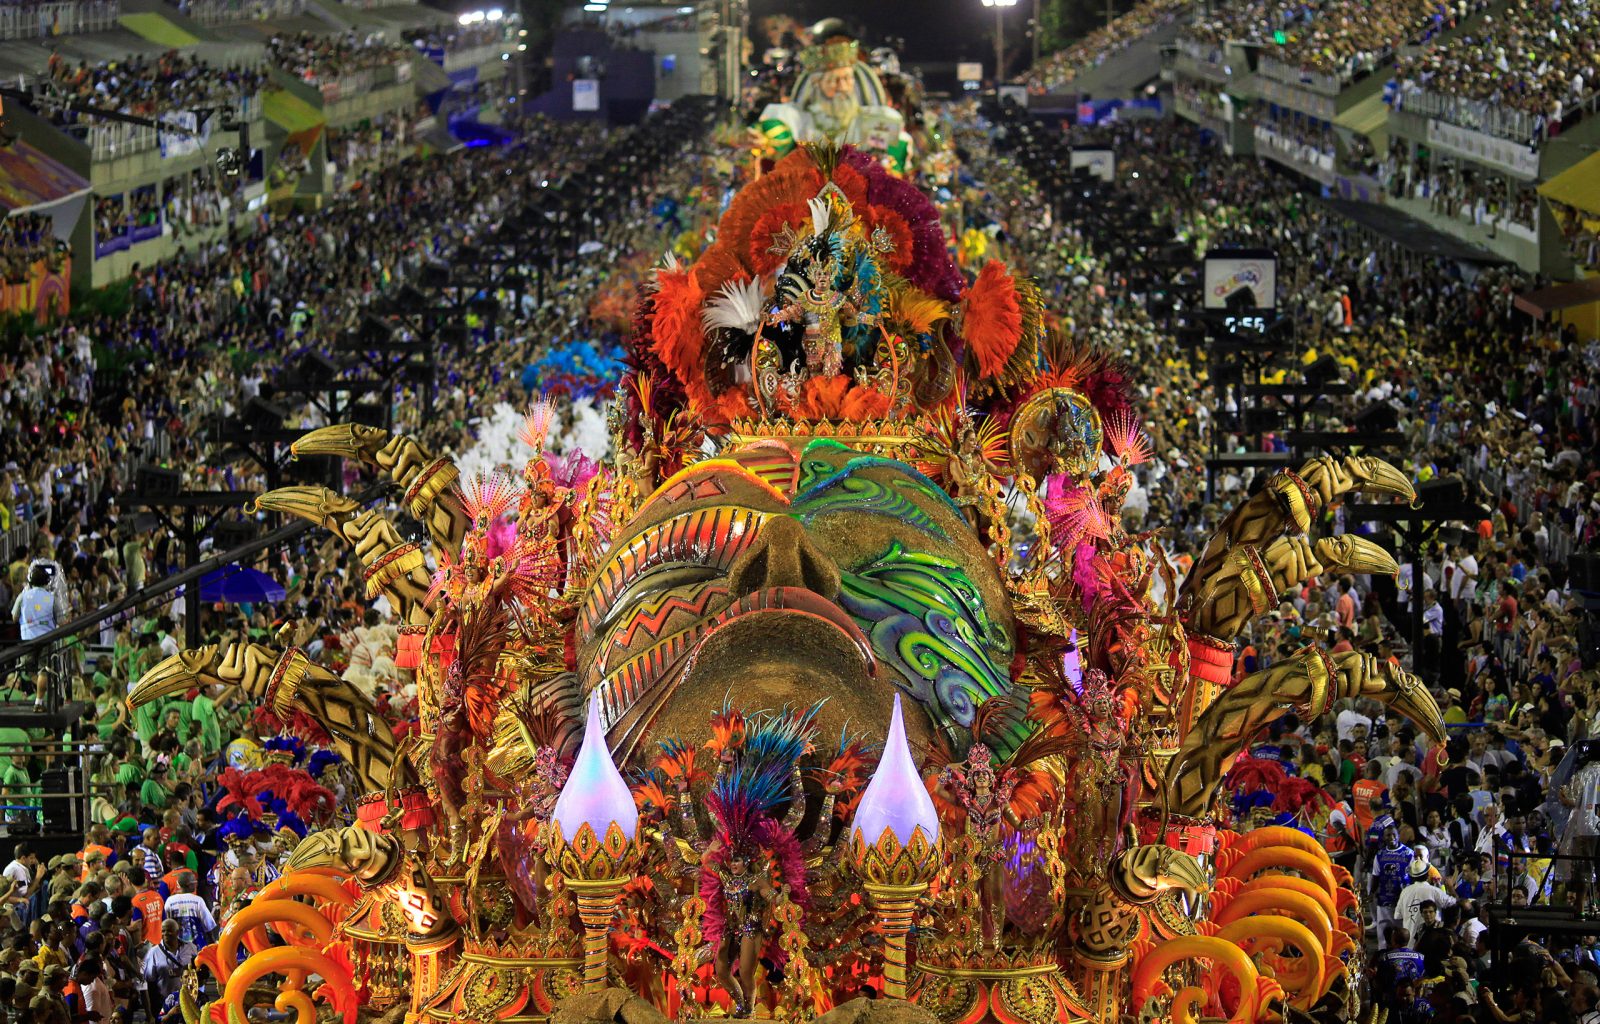 Prove to Be a Trivia Genius by Answering These 20 Random Questions The Beija Flor samba school parades during the Rio de Janeiro's Carnival